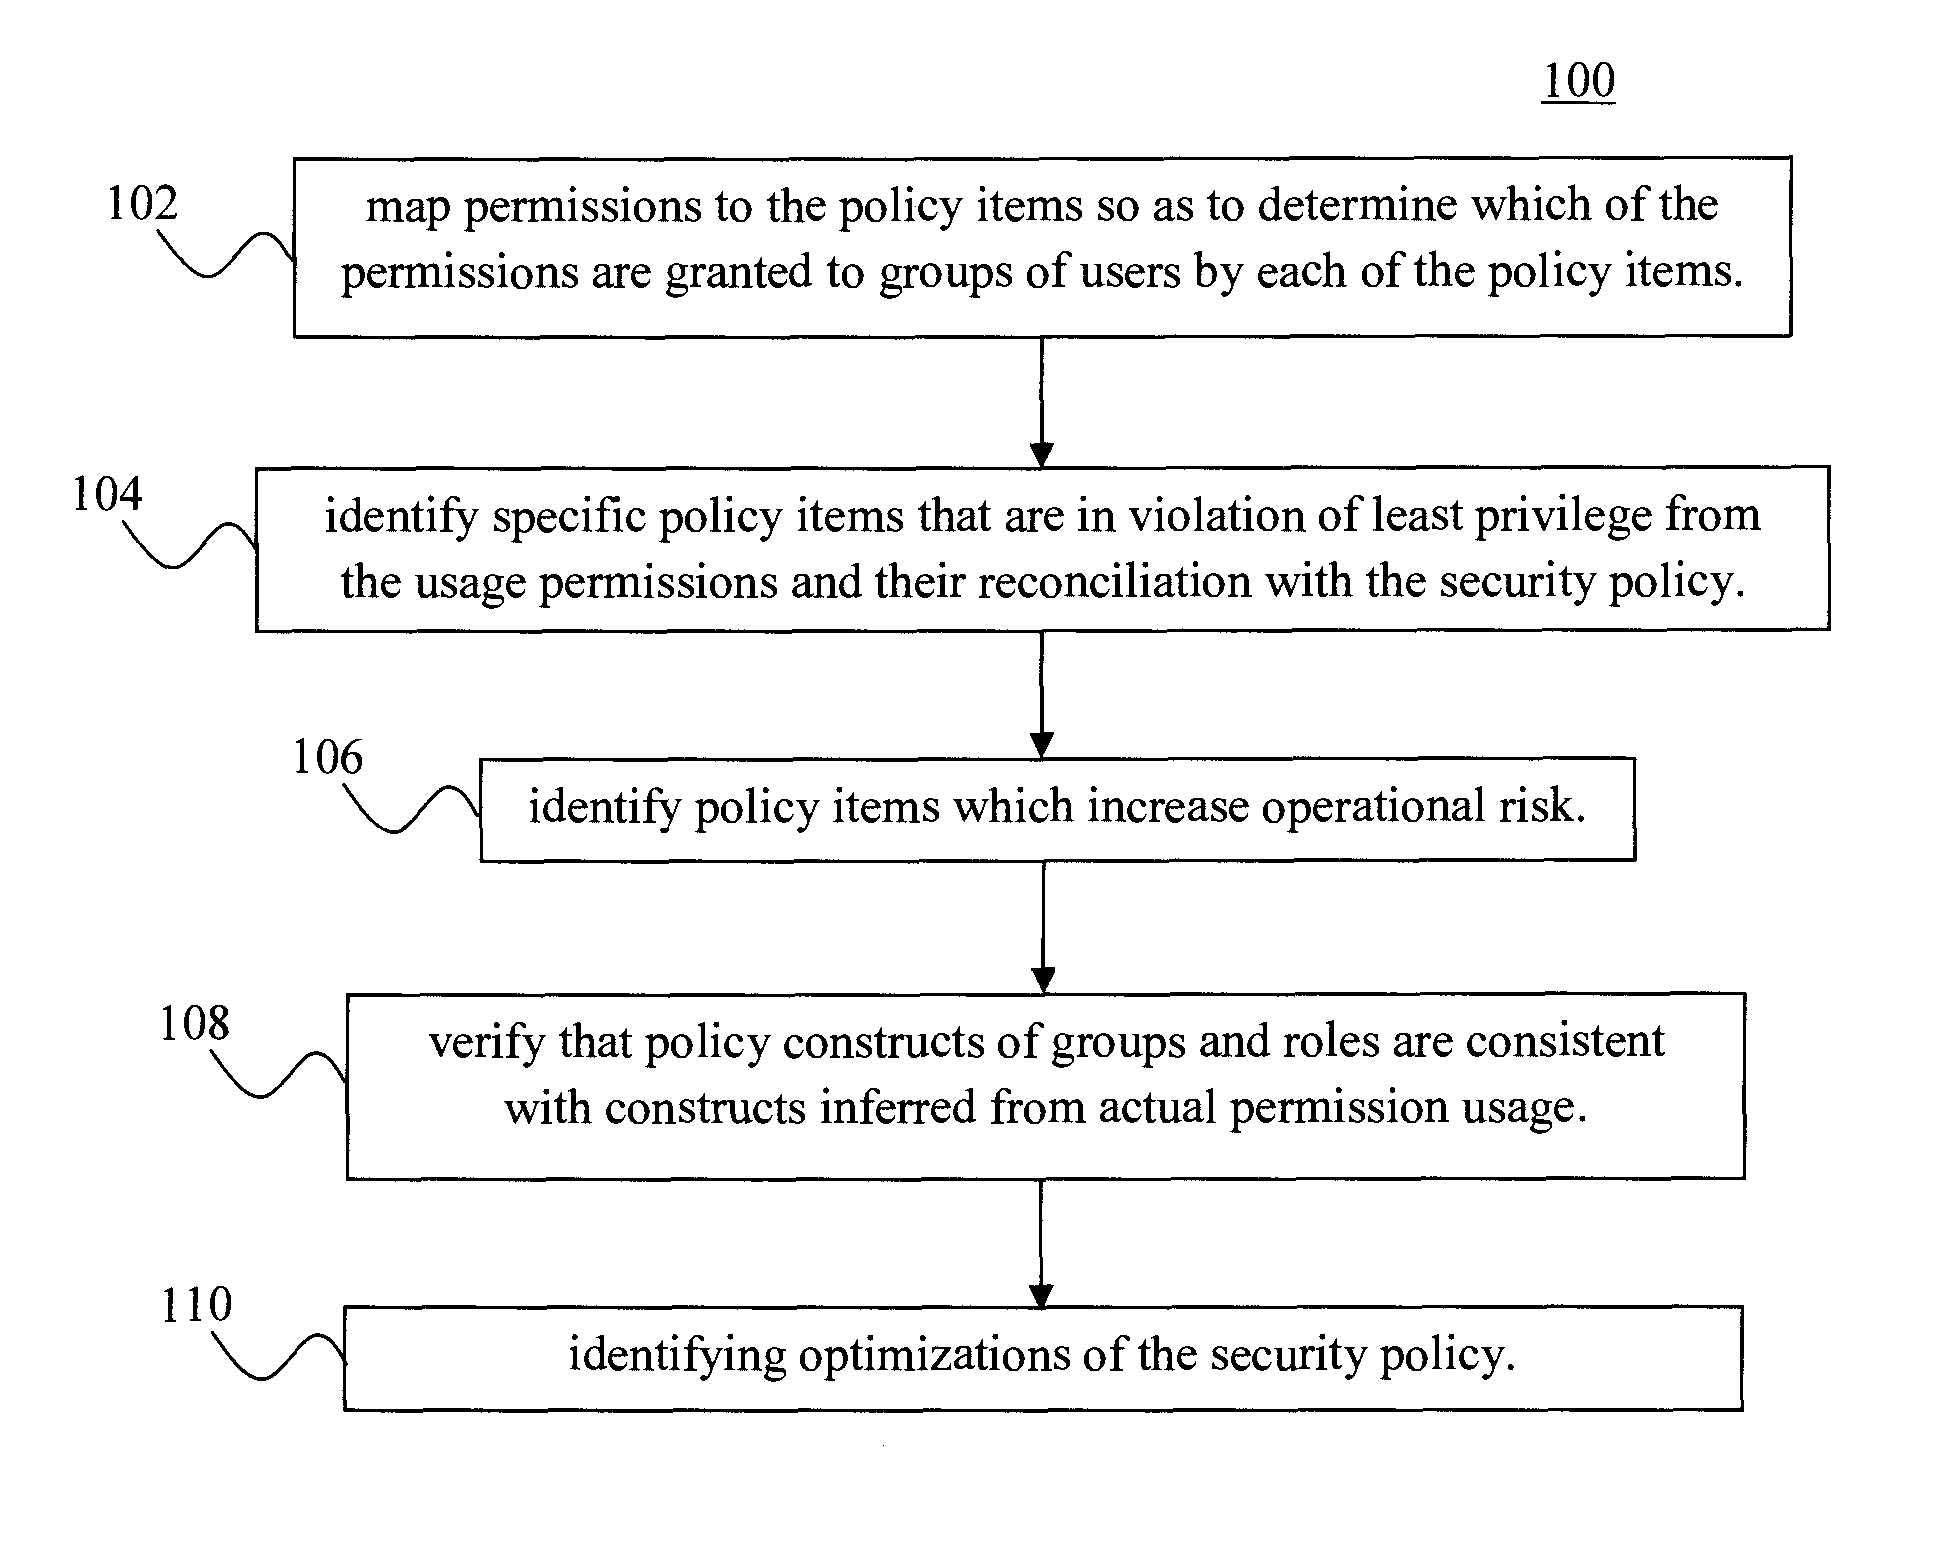 Techniques for reconciling permission usage with security policy for policy optimization and monitoring continuous compliance